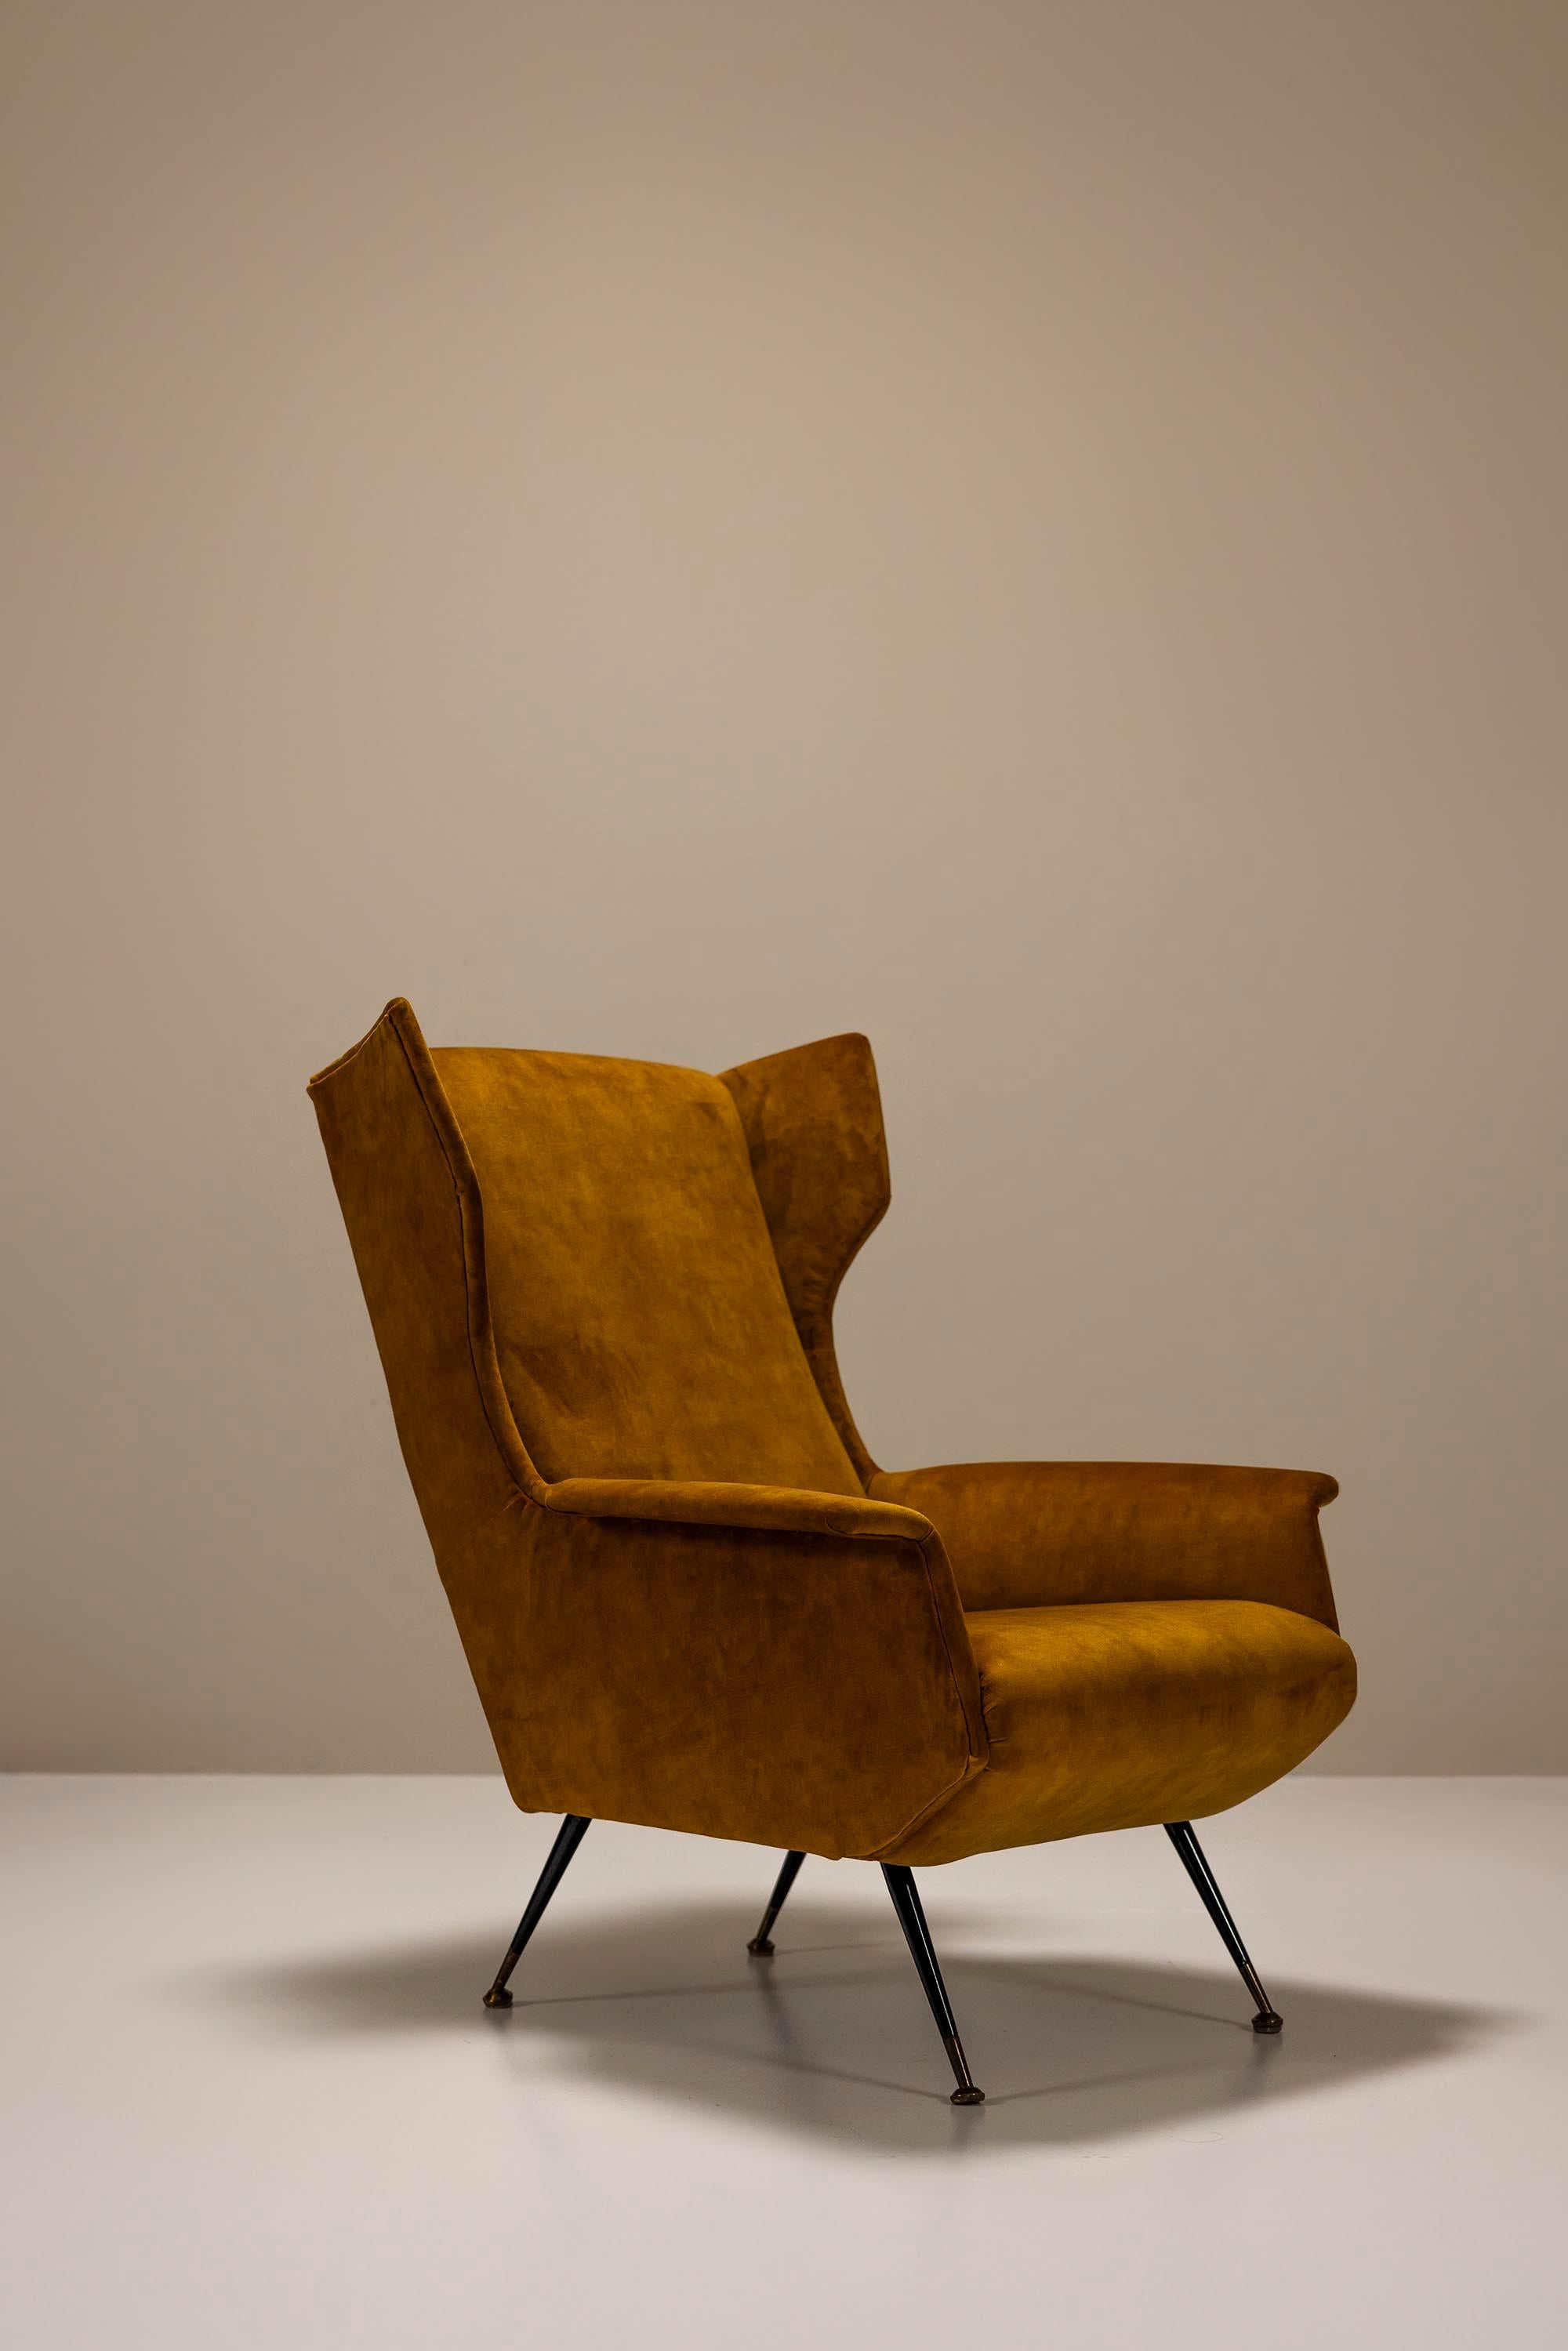 Mid-20th Century Italian Wingback Lounge Chair In Ocher And Metal, Italy 1950's